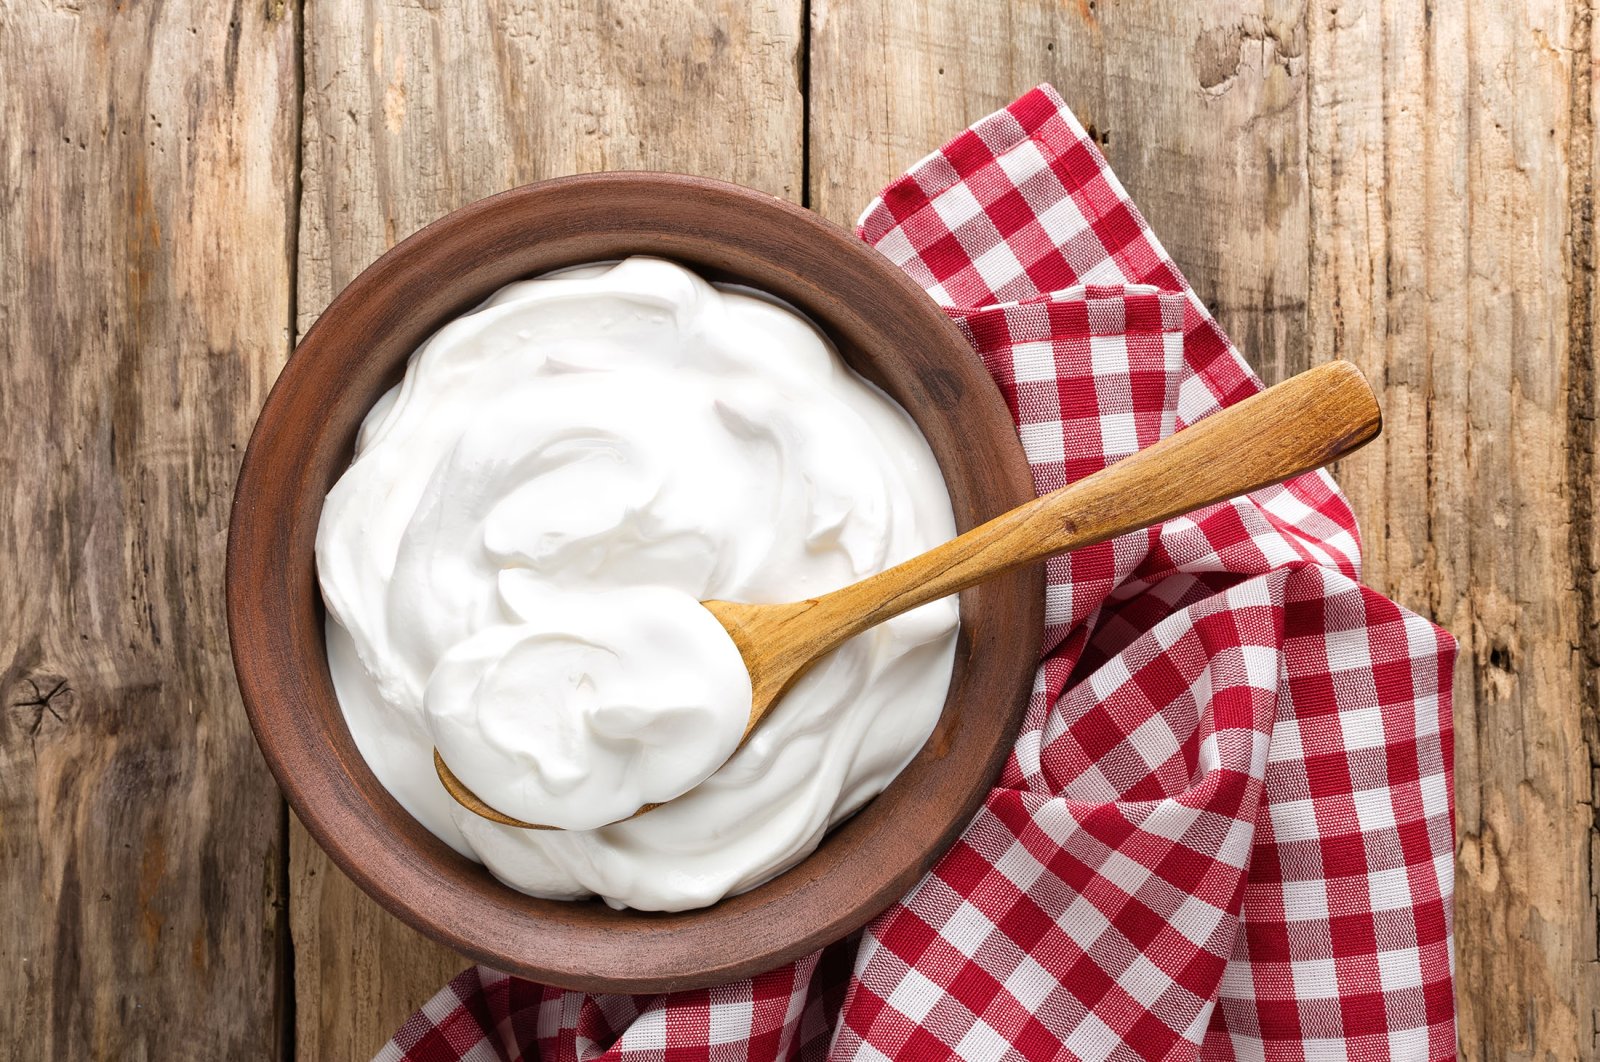 Yogurt can be used in a variety of fun recipes. (Shutterstock Photo)